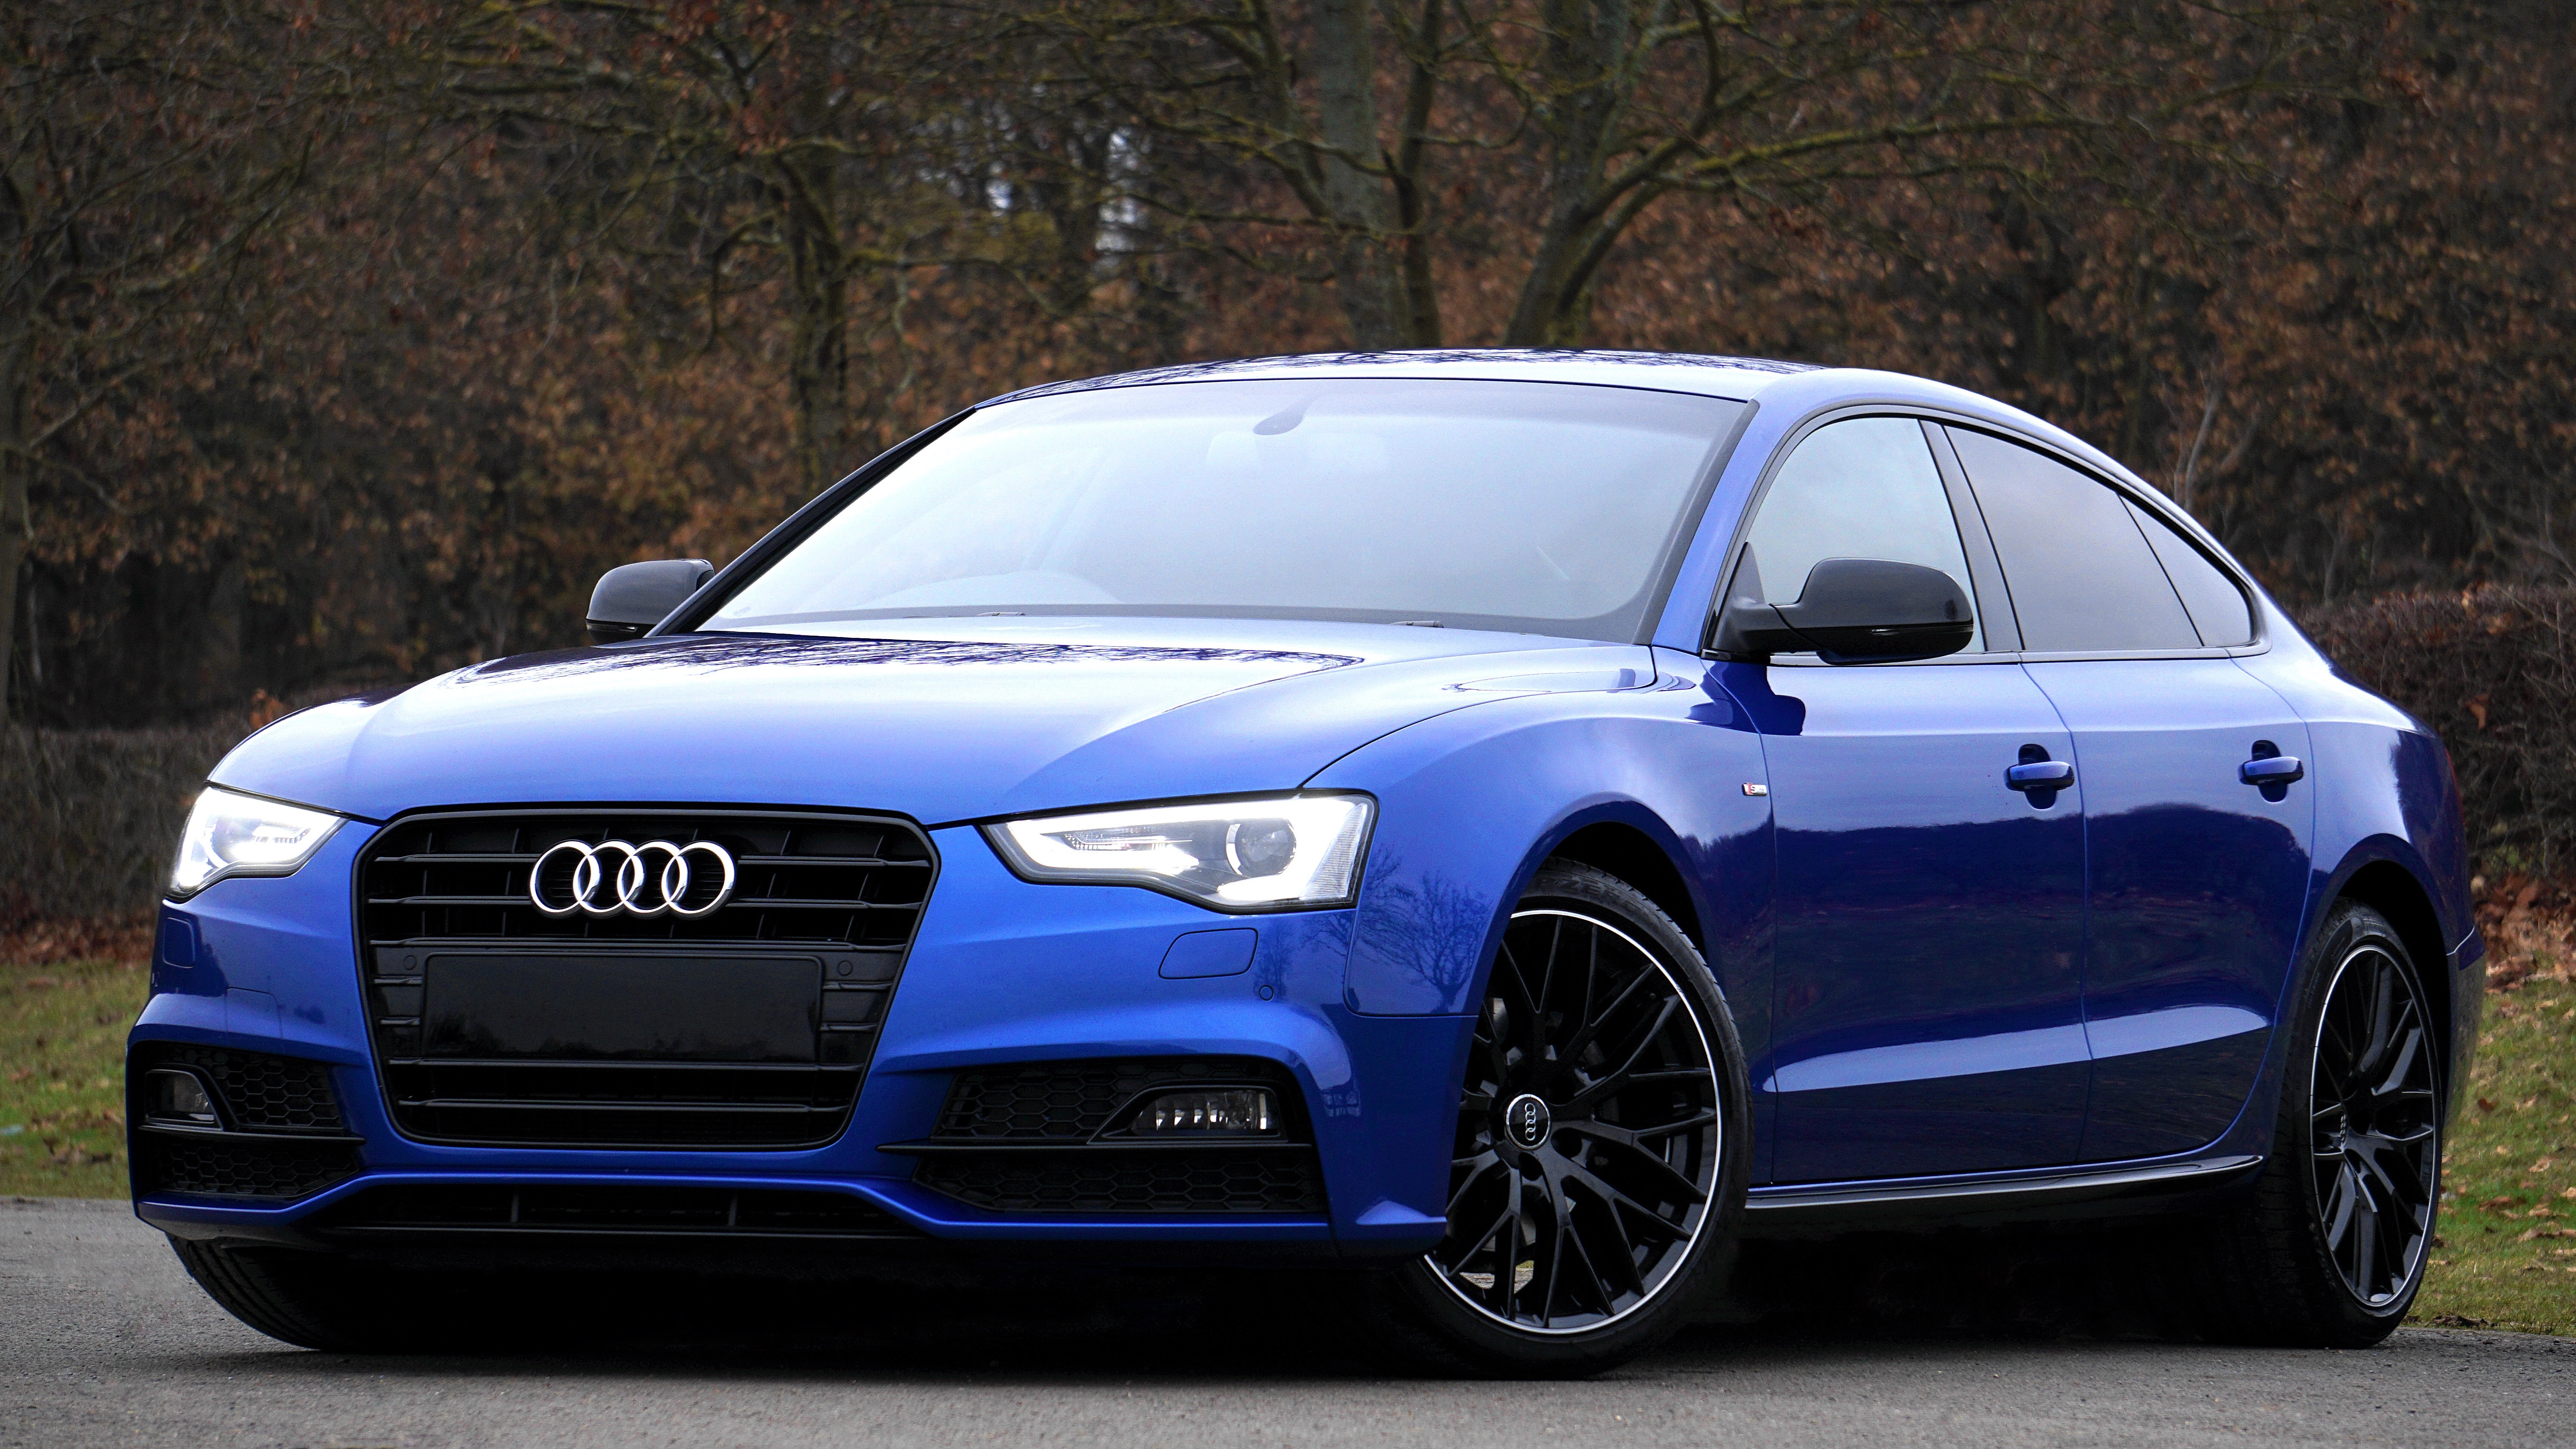 Audi wallpapers for desktop, download free Audi pictures and backgrounds  for PC 